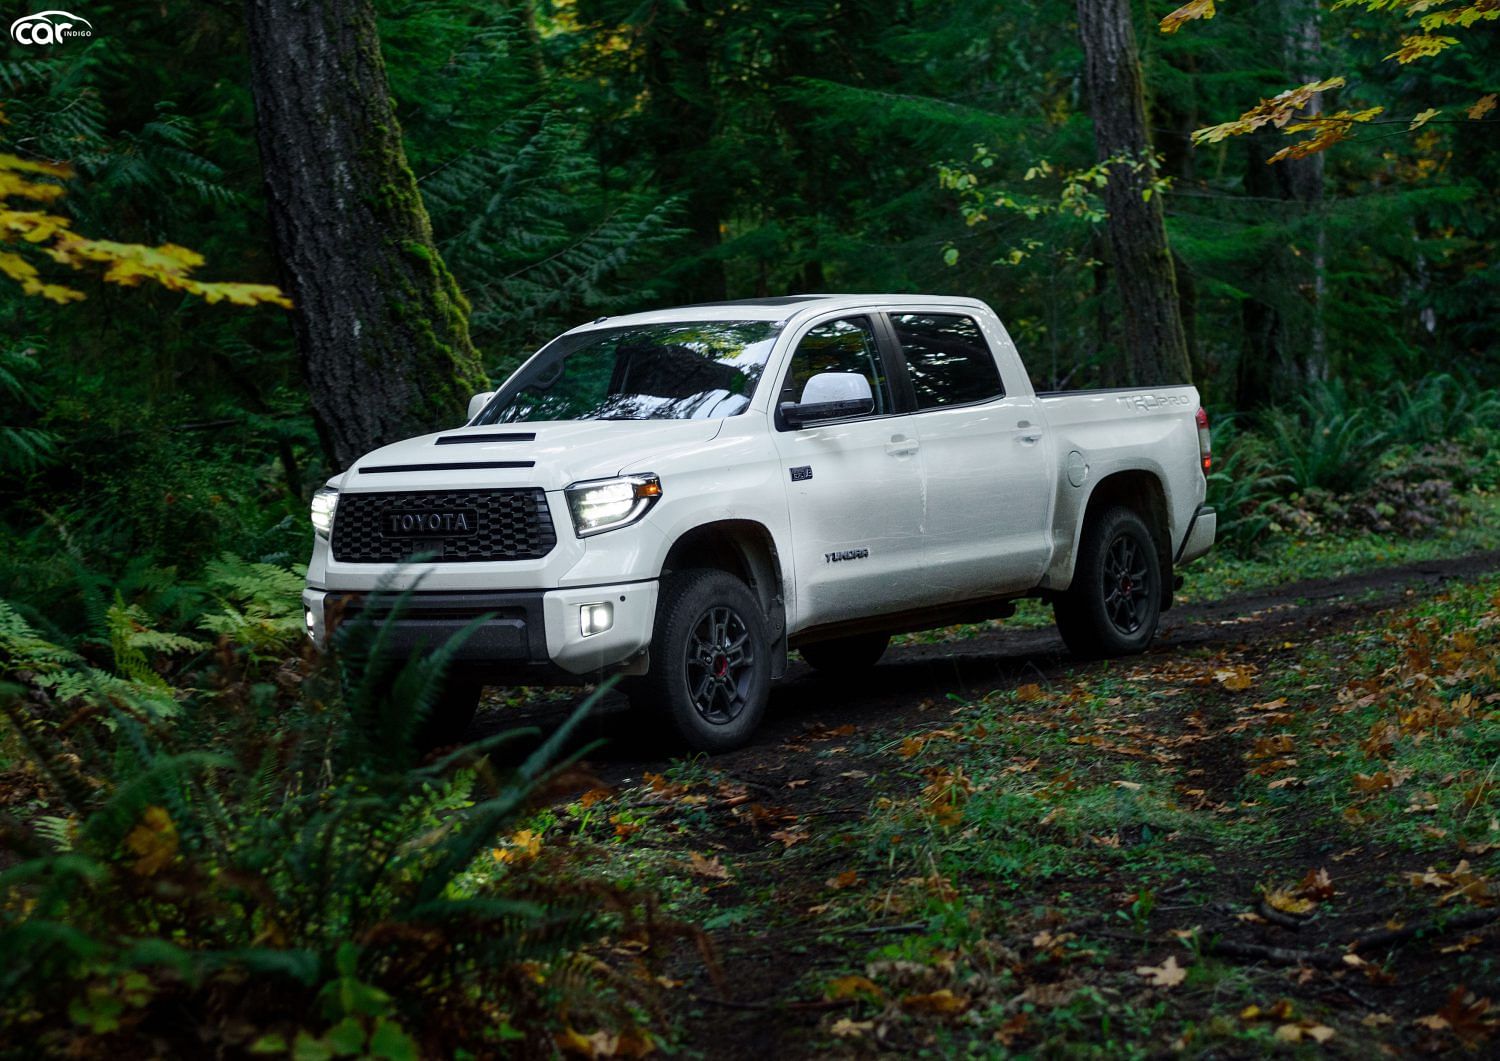 2022 Toyota Tundra Preview Release Date Interior Mpg Towing